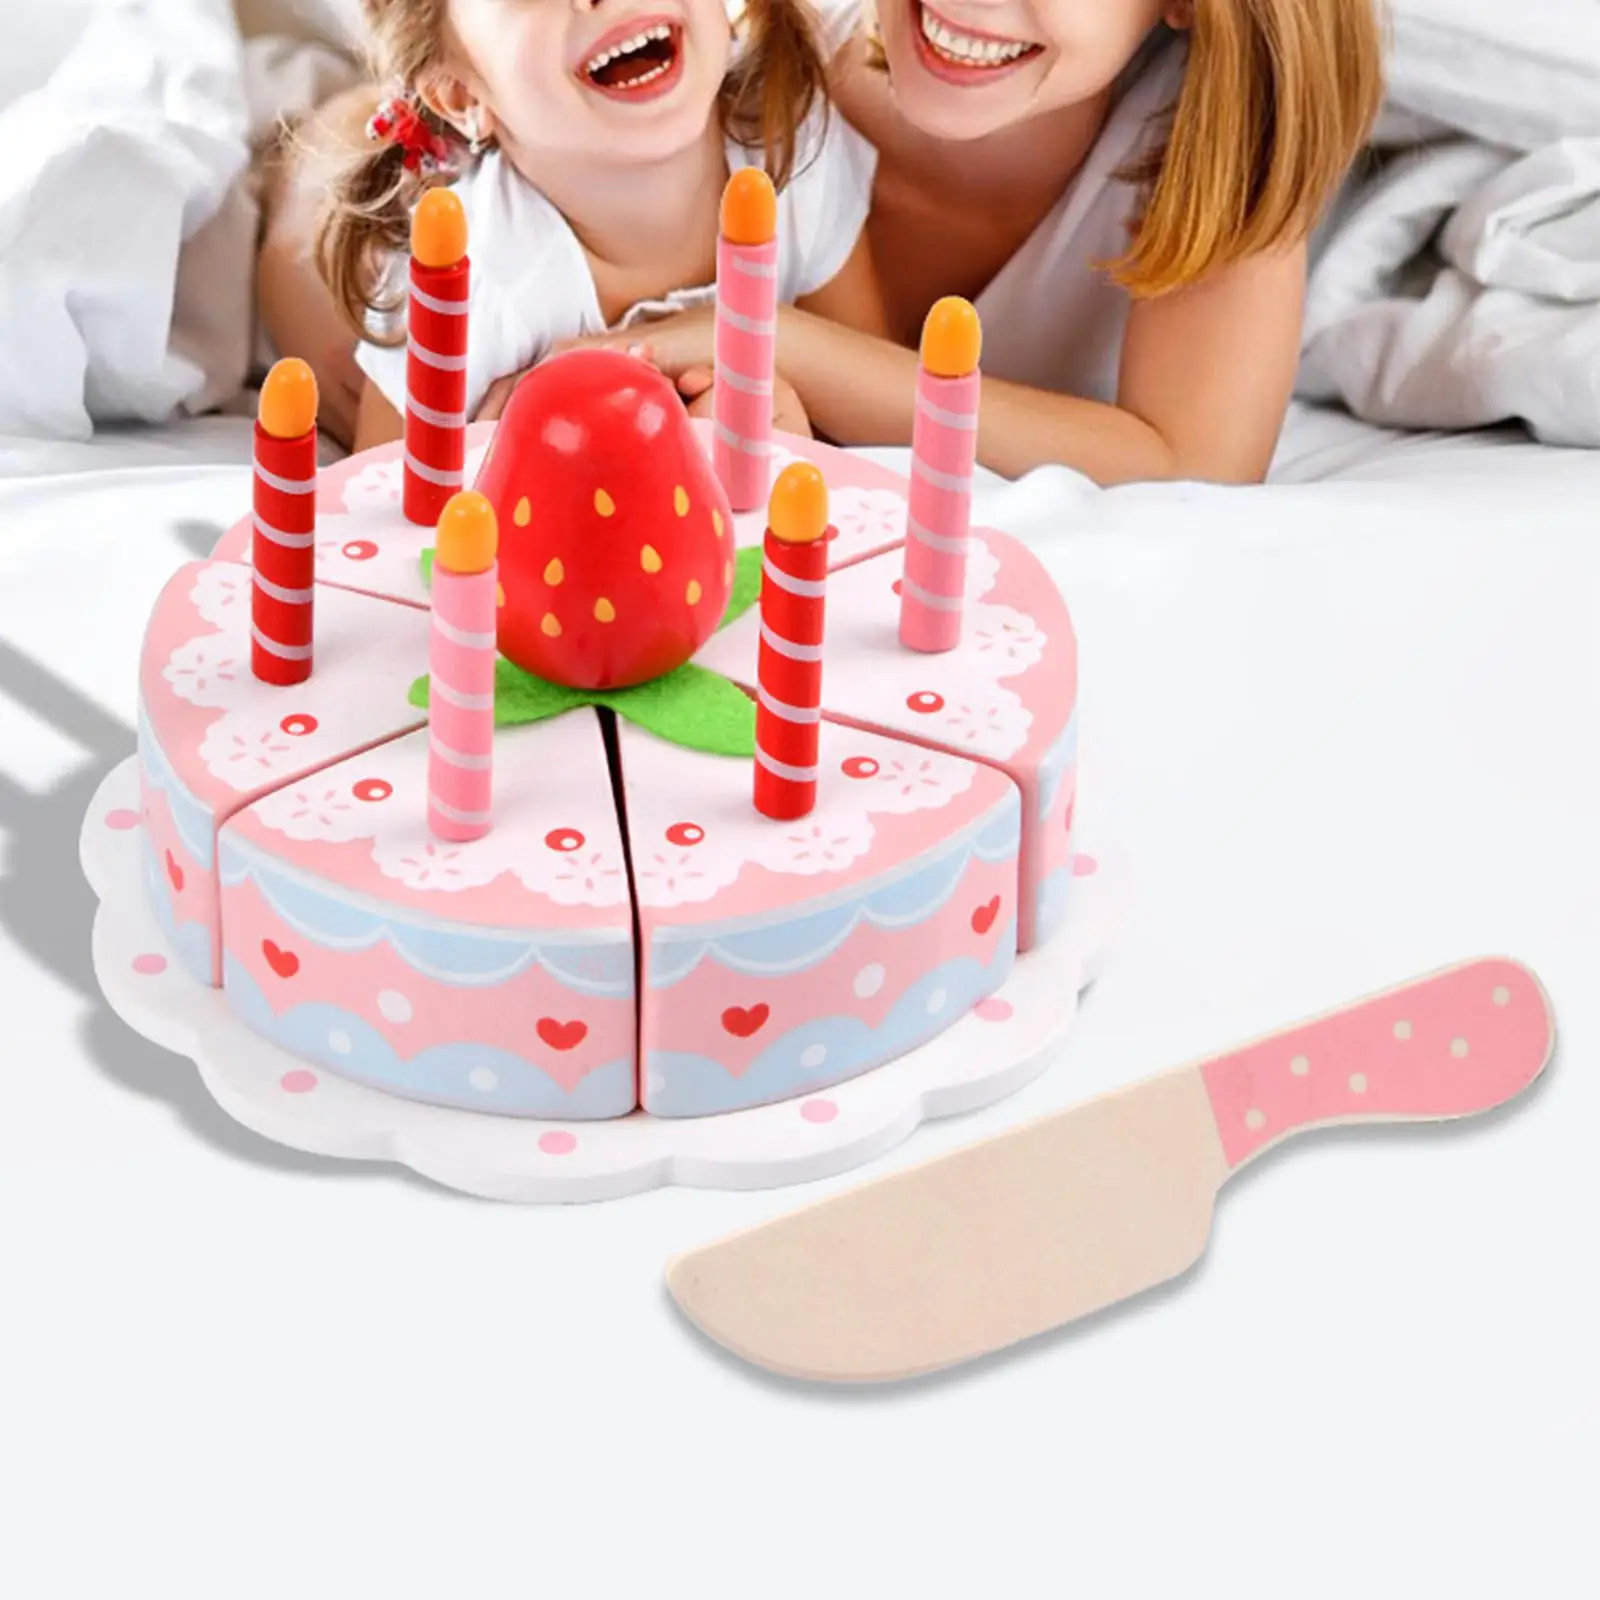 Kitchen Birthday Cake Toy, Cutting Cake Playset Role Play Toys Food Pretend Play for Kids Holiday Gift